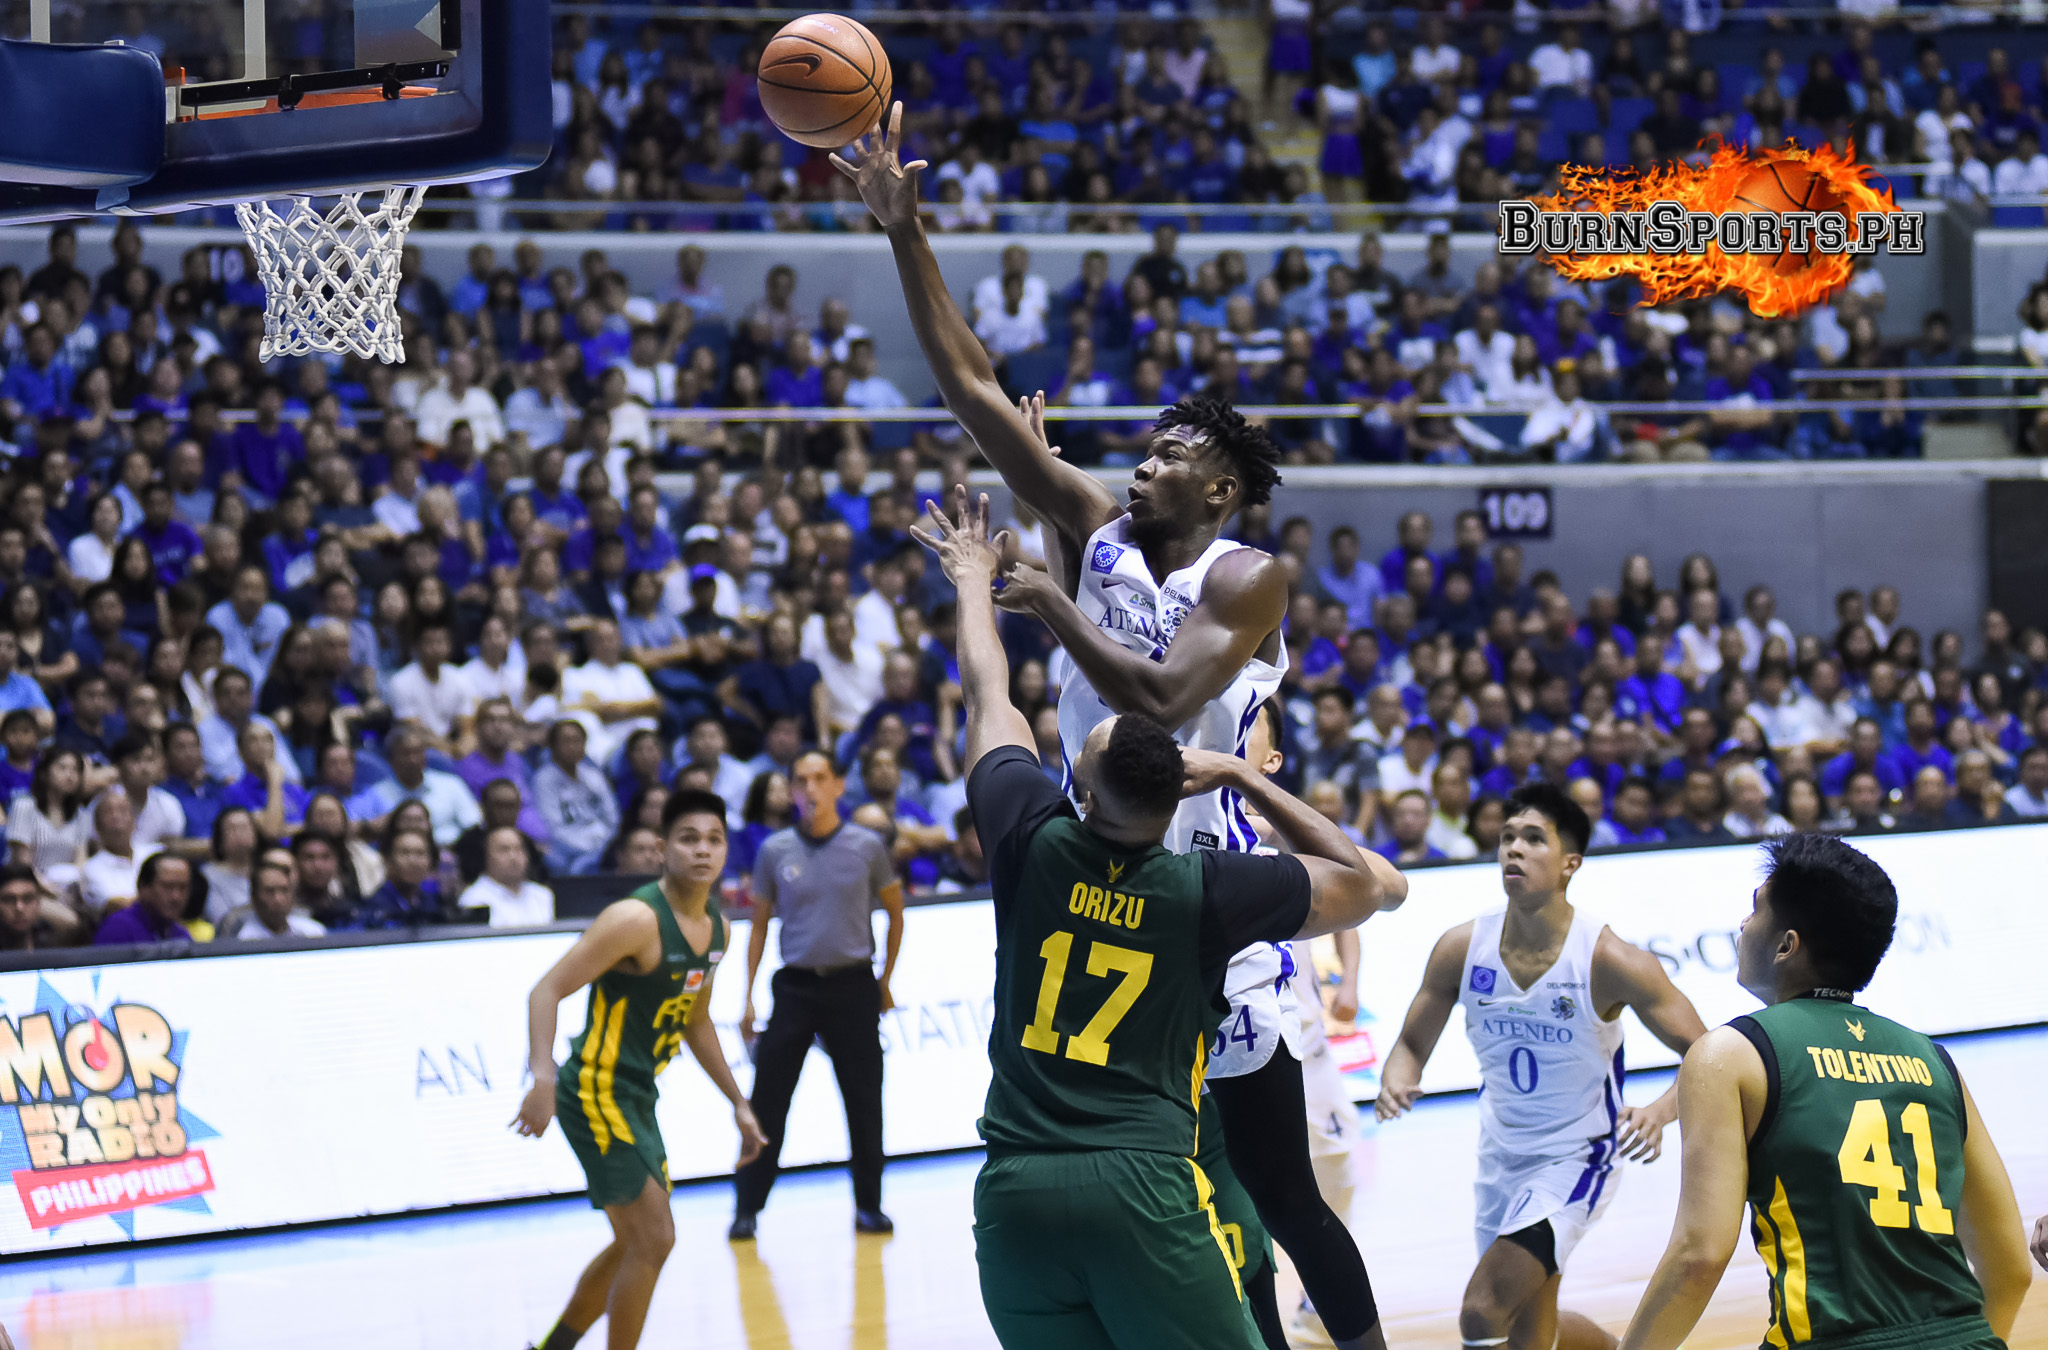 Ateneo ousts FEU, makes third straight Finals apperance